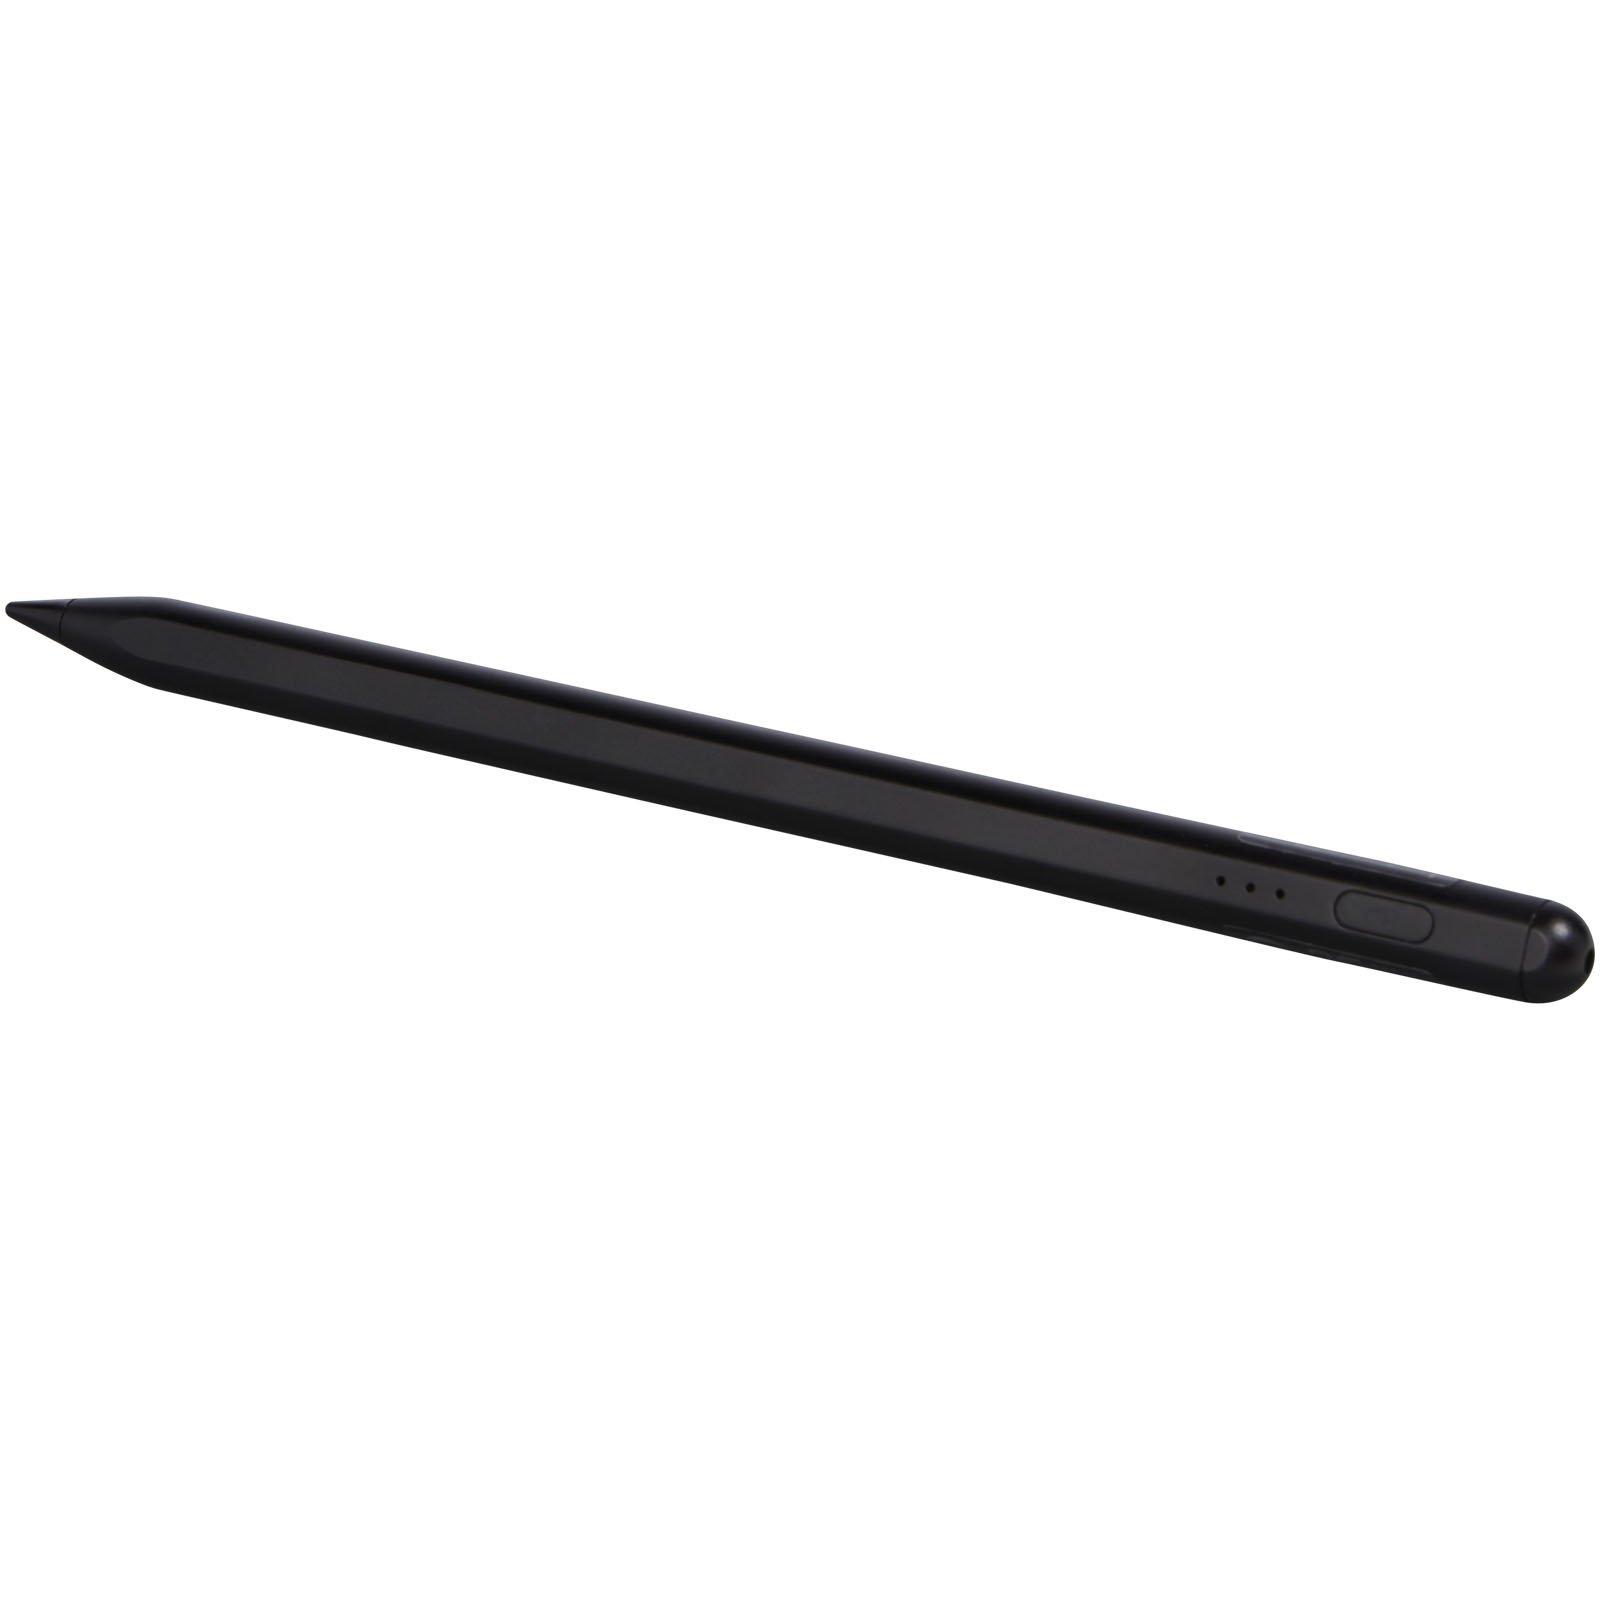 Telephone & Tablet Accessories - Hybrid Active stylus pen for iPad